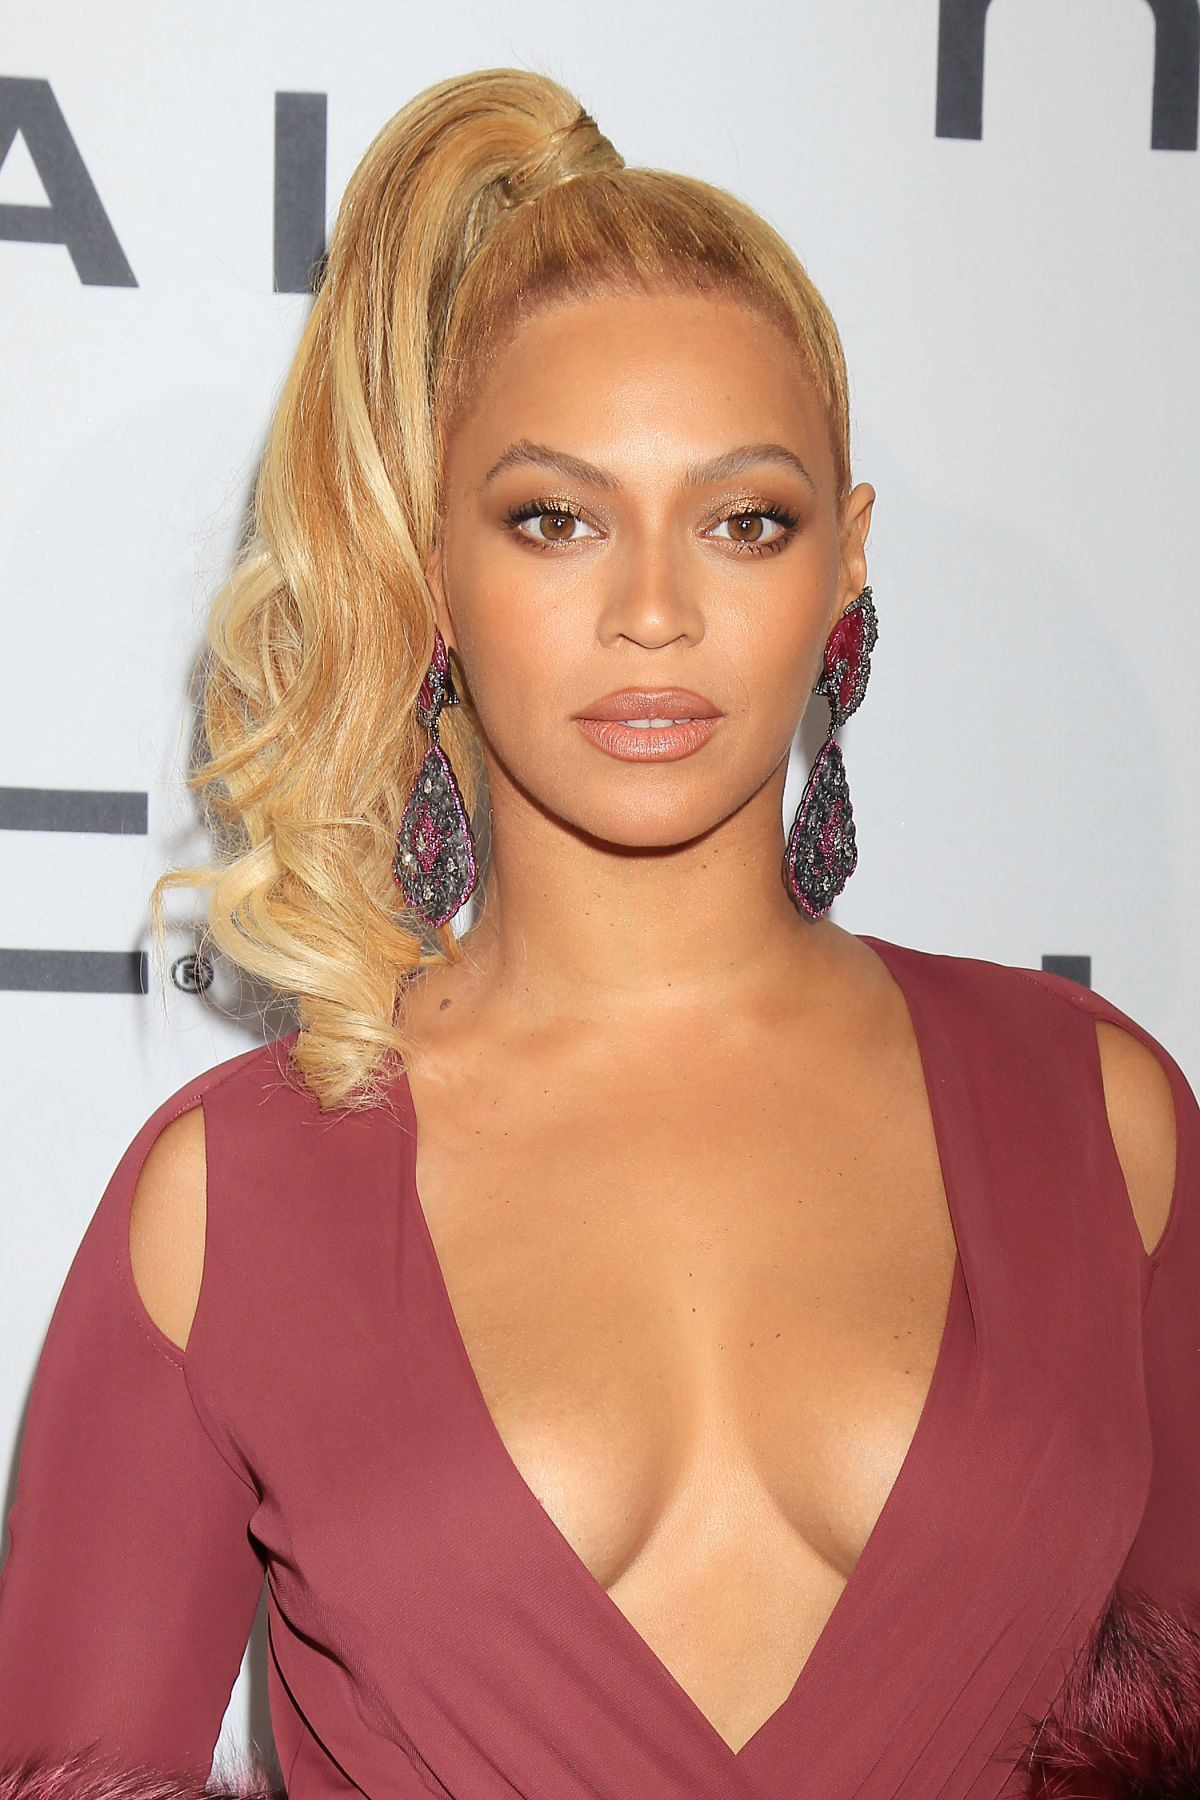 beyonce-at-tidal-x-1020-amplified-by-htc-in-brooklyn-10-20-2015_13.jpg